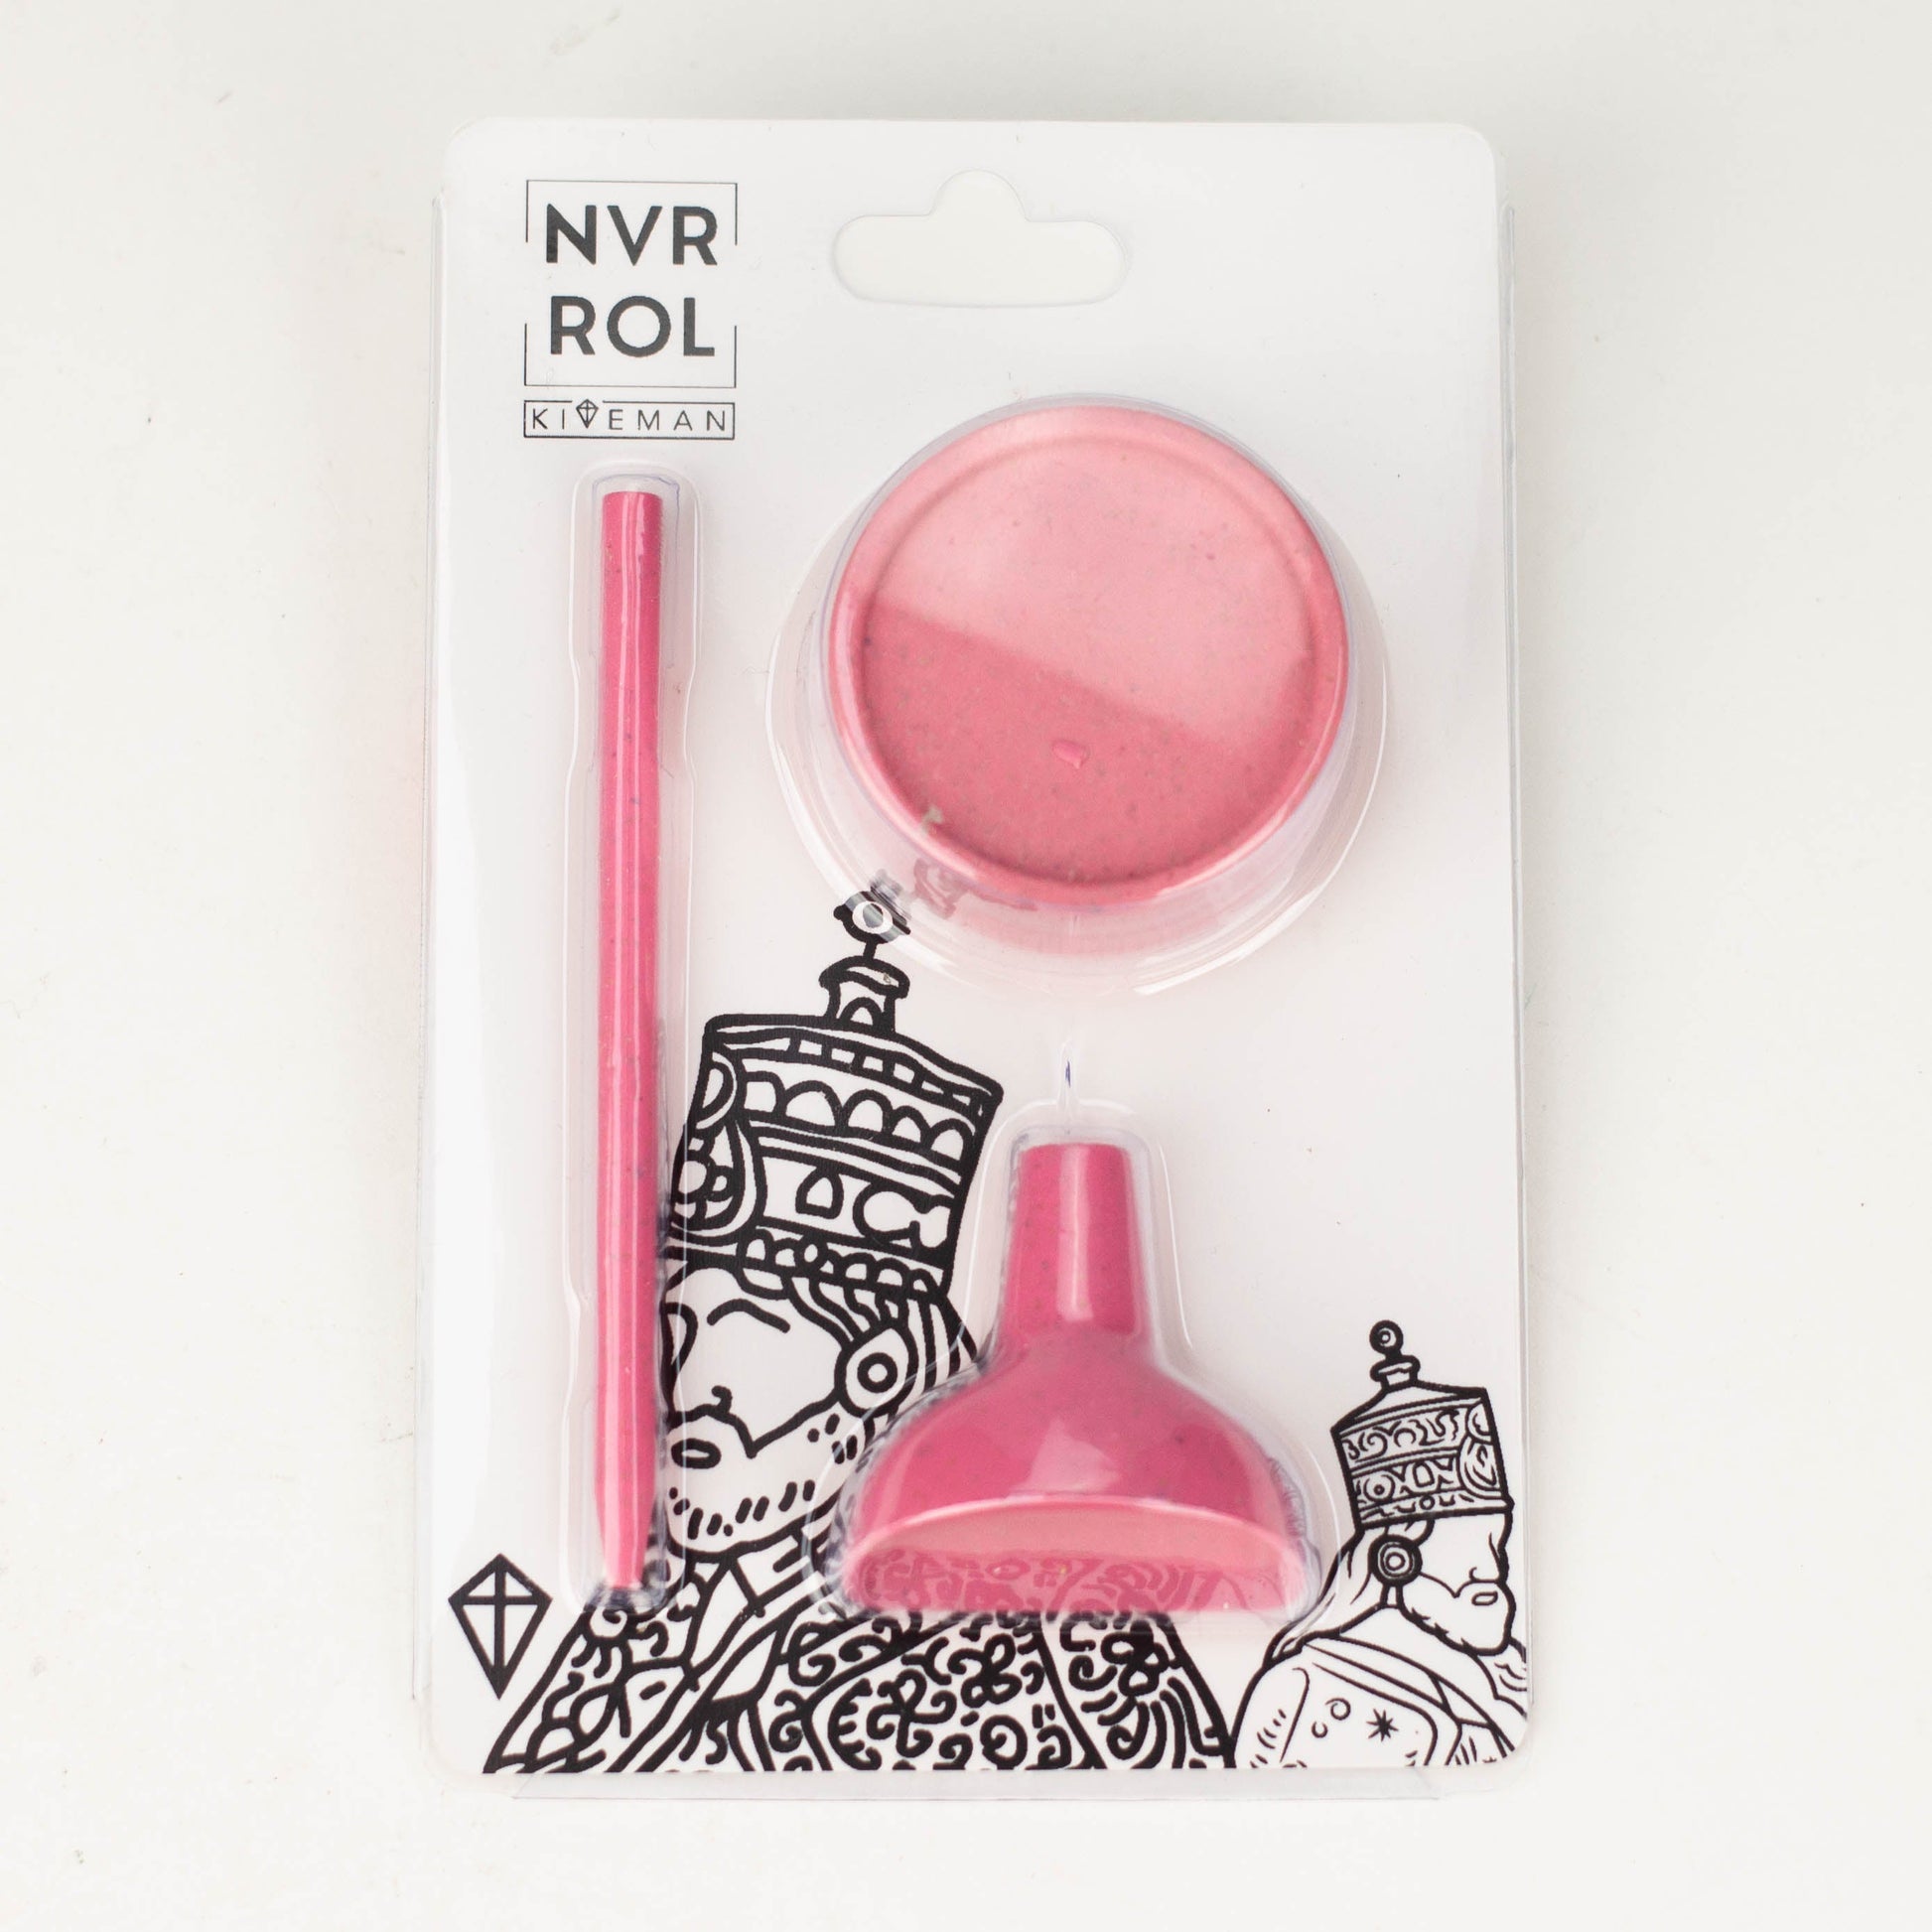 NVRROL X KITEMAN 3 in 1 Cone filling kit with Mini Grinder, Funnel, Poking Stick_1